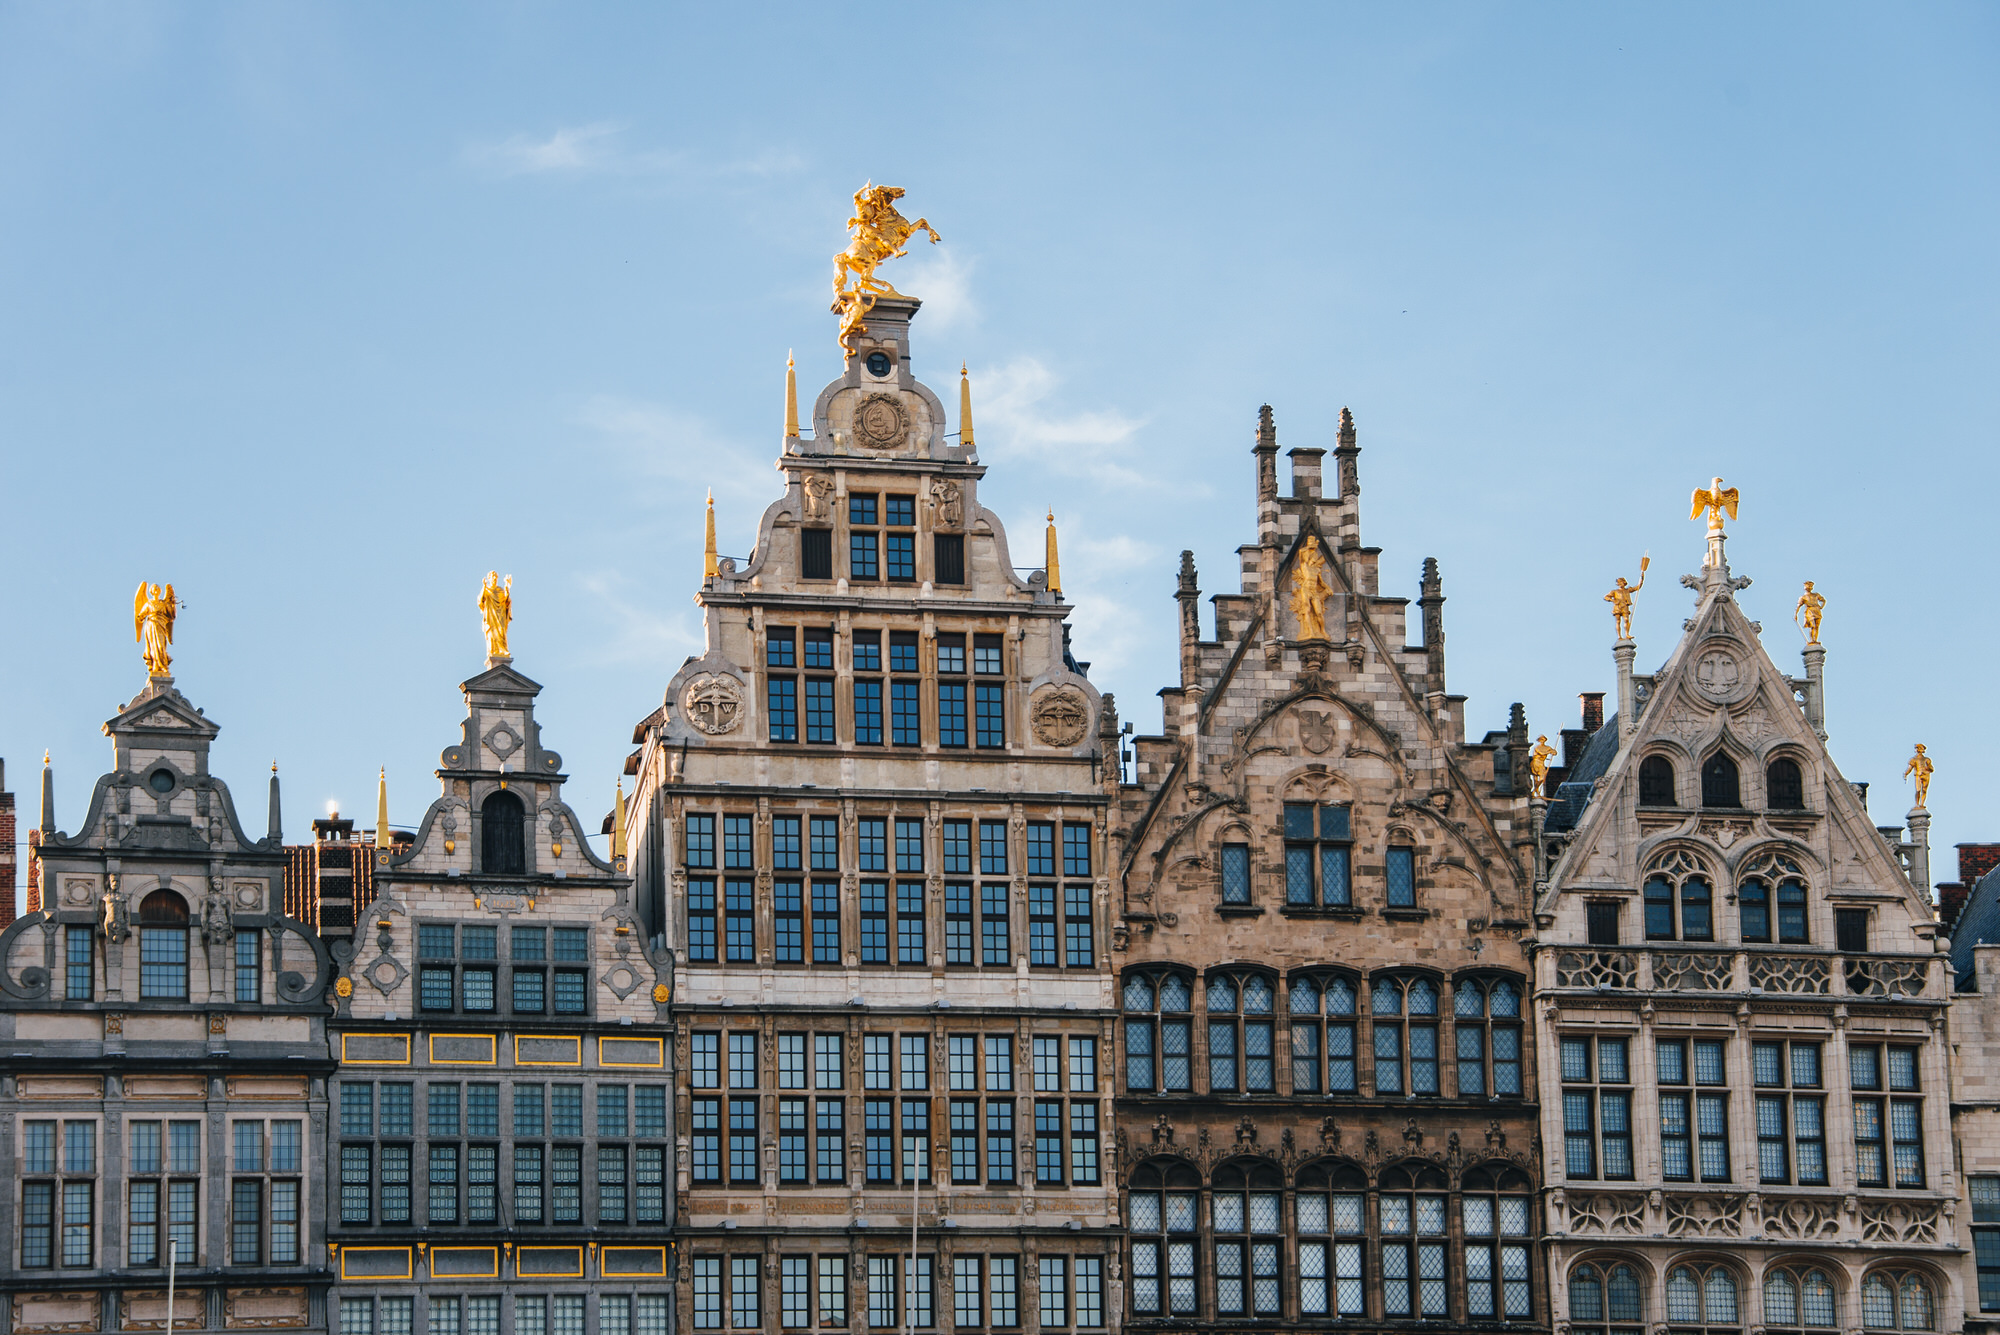 800 years of the city of Antwerp